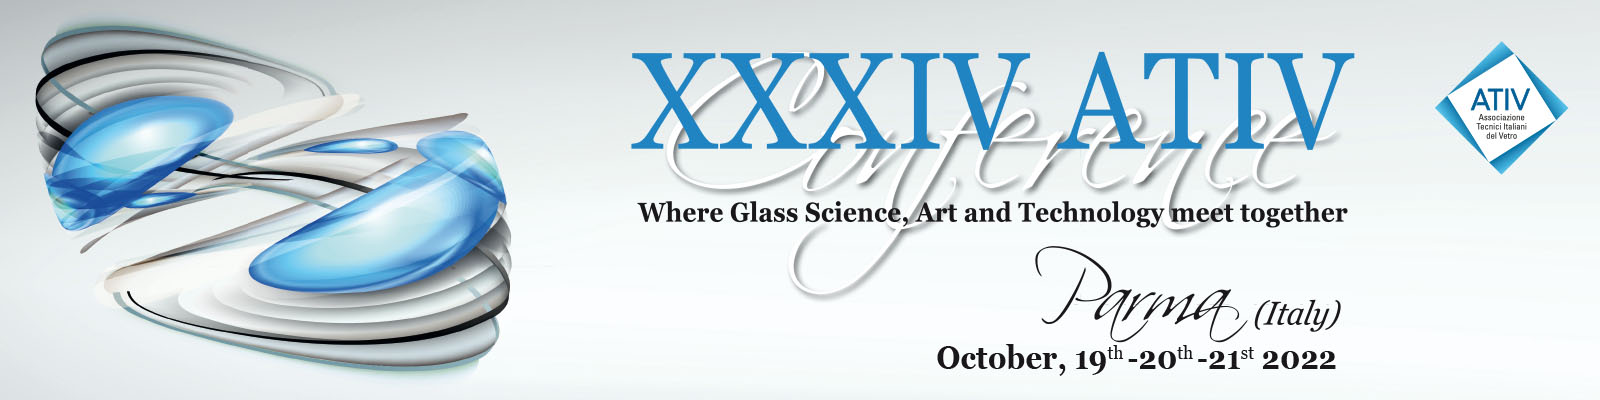 XXXIV ATIV Conference - where Glass Science, Art and Technology meet together